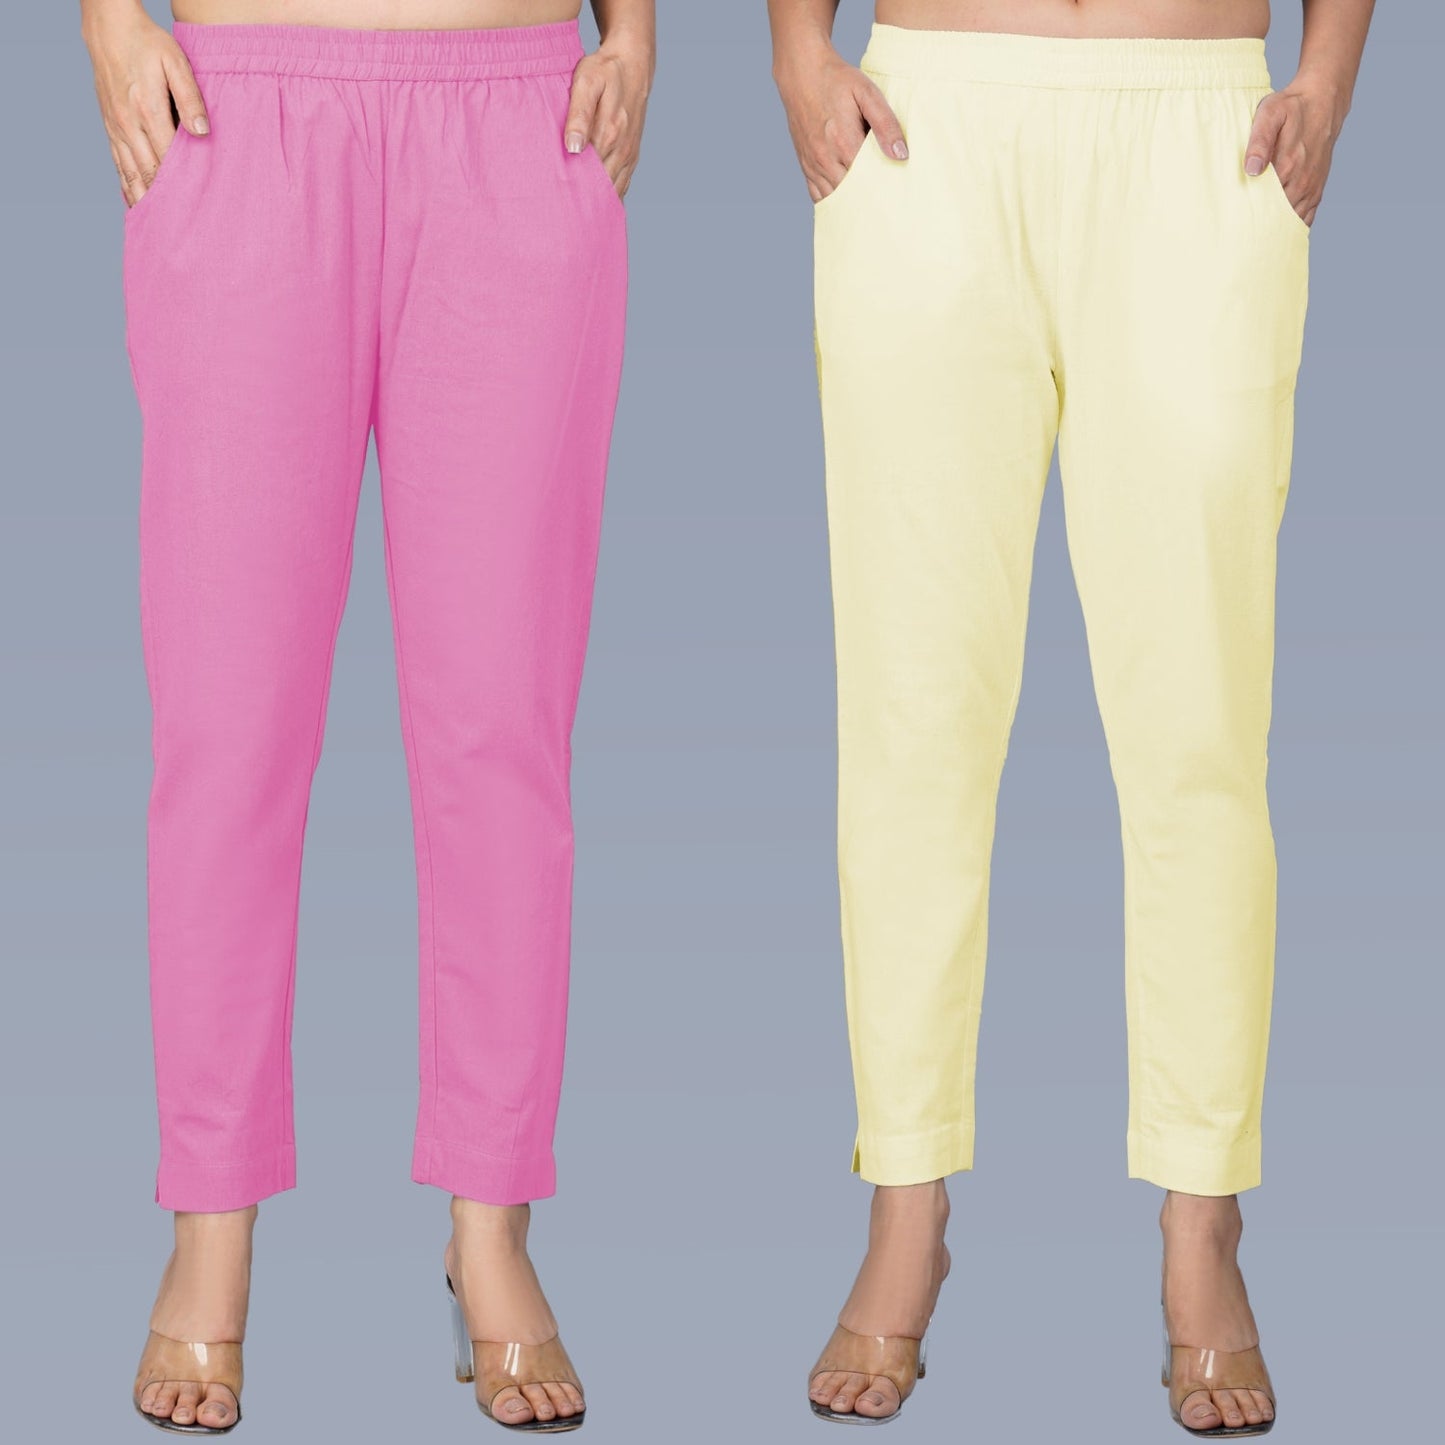 Pack Of 2 Womens Regular Fit Pink And Cream Fully Elastic Waistband Cotton Trouser